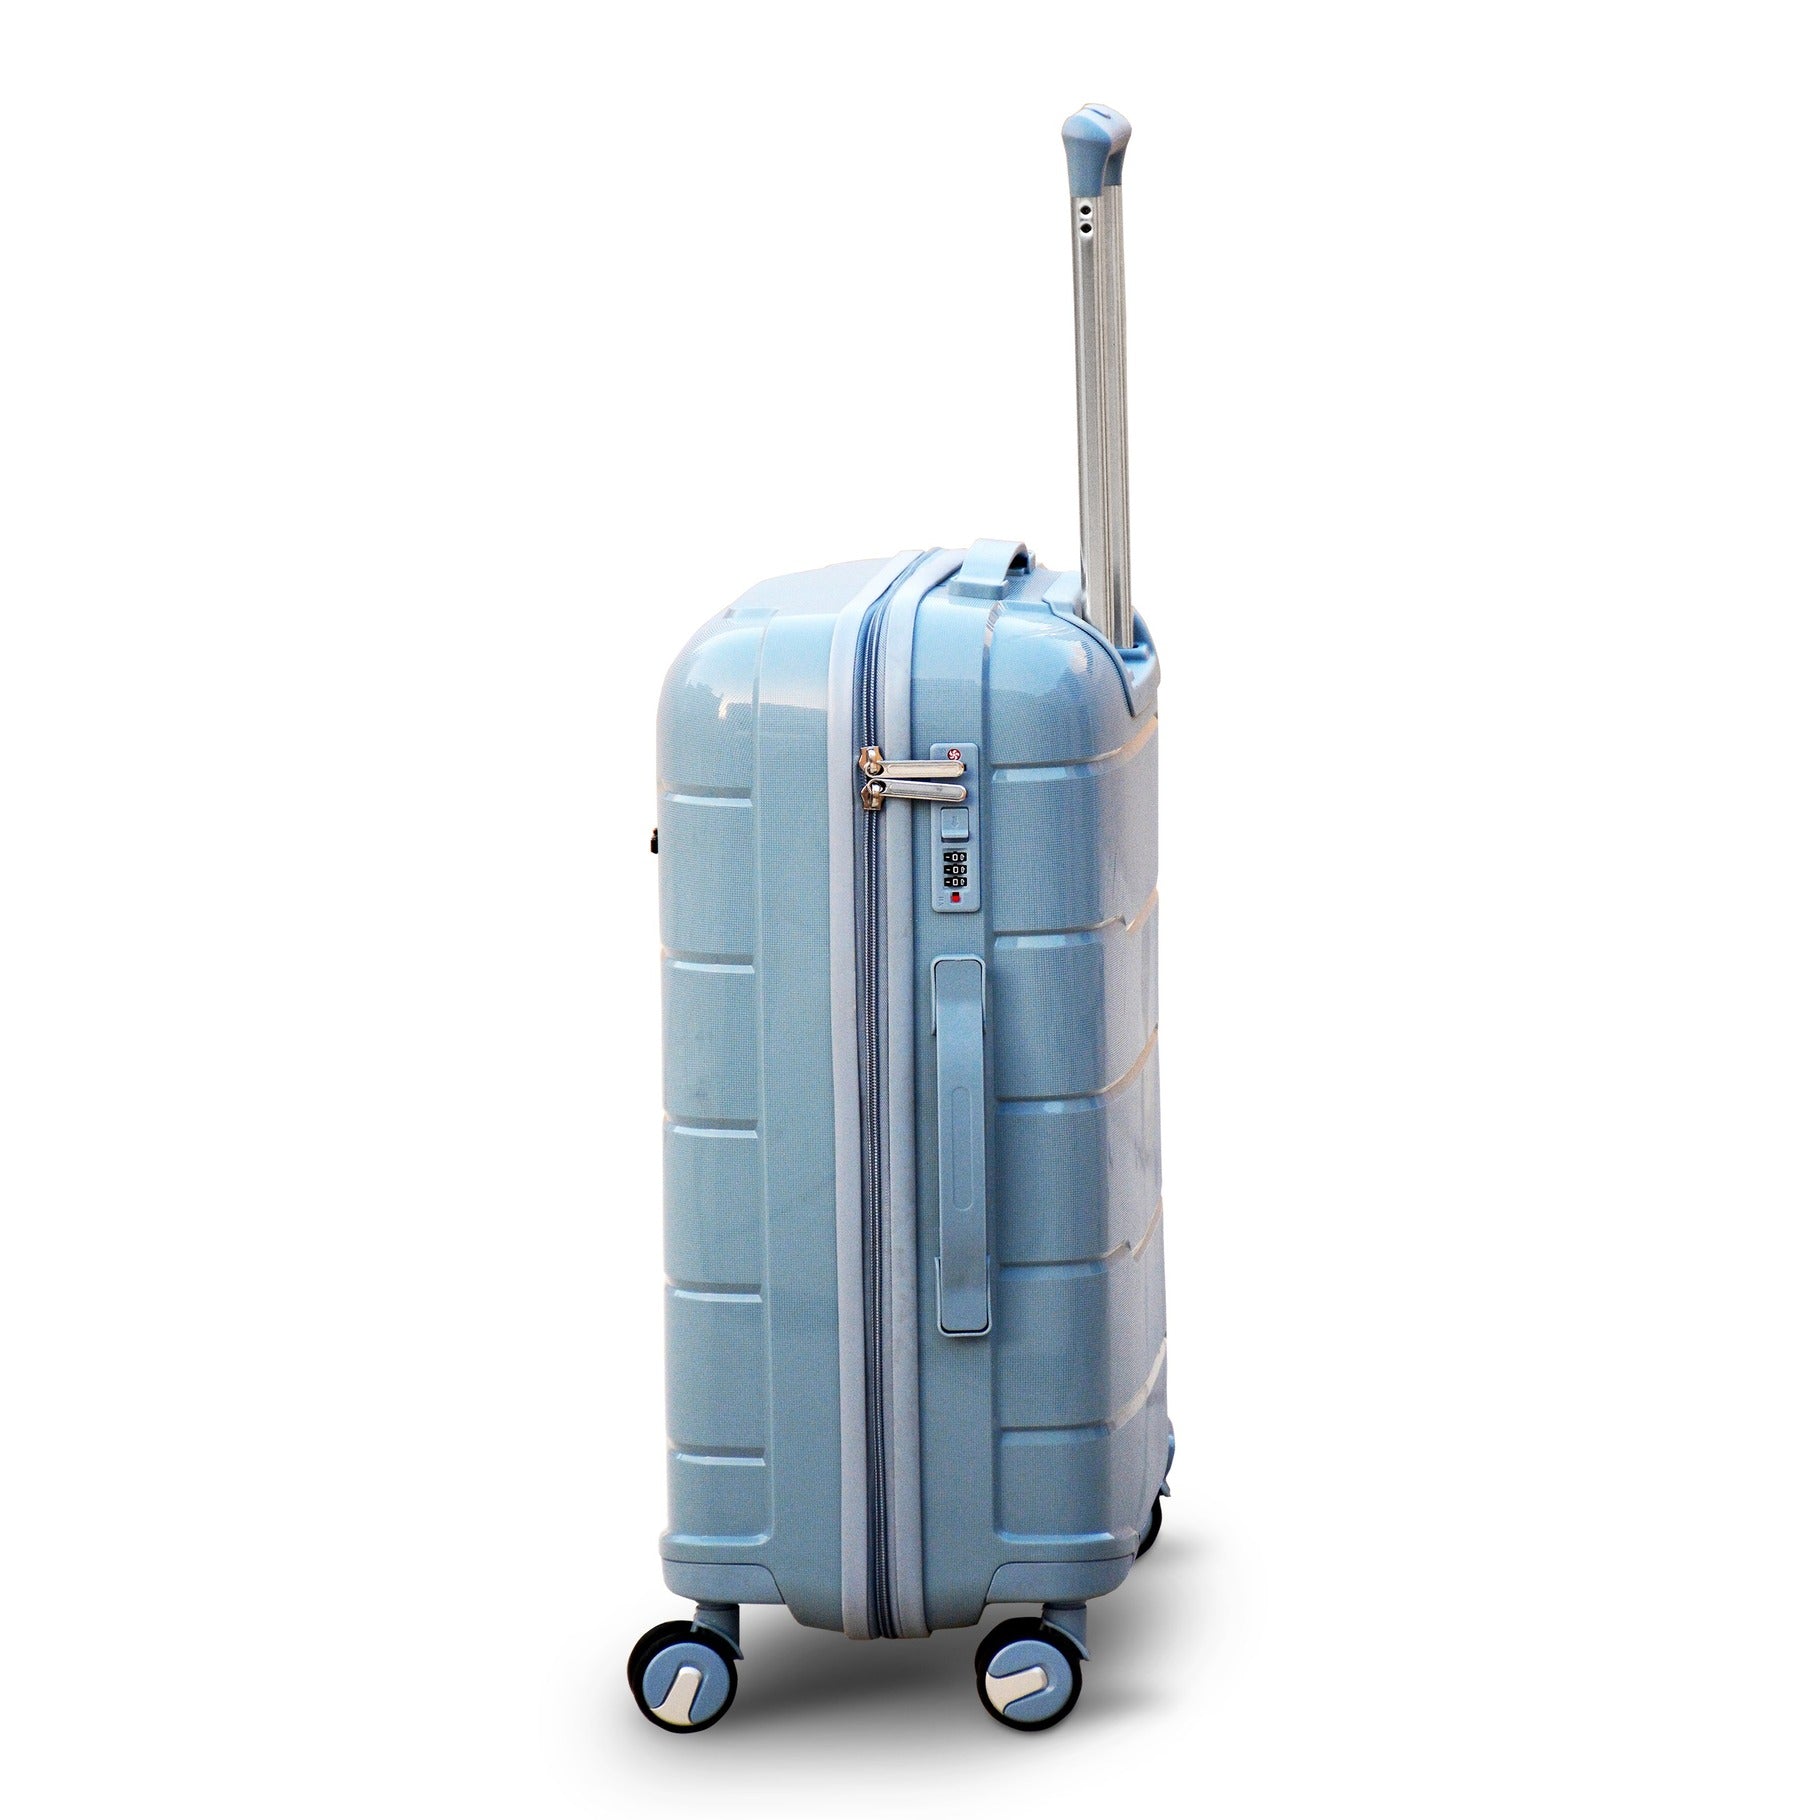 24" Grey Colour Non Expandable Ceramic PP Luggage Lightweight Hard Case Trolley Bag with Double Spinner Wheel